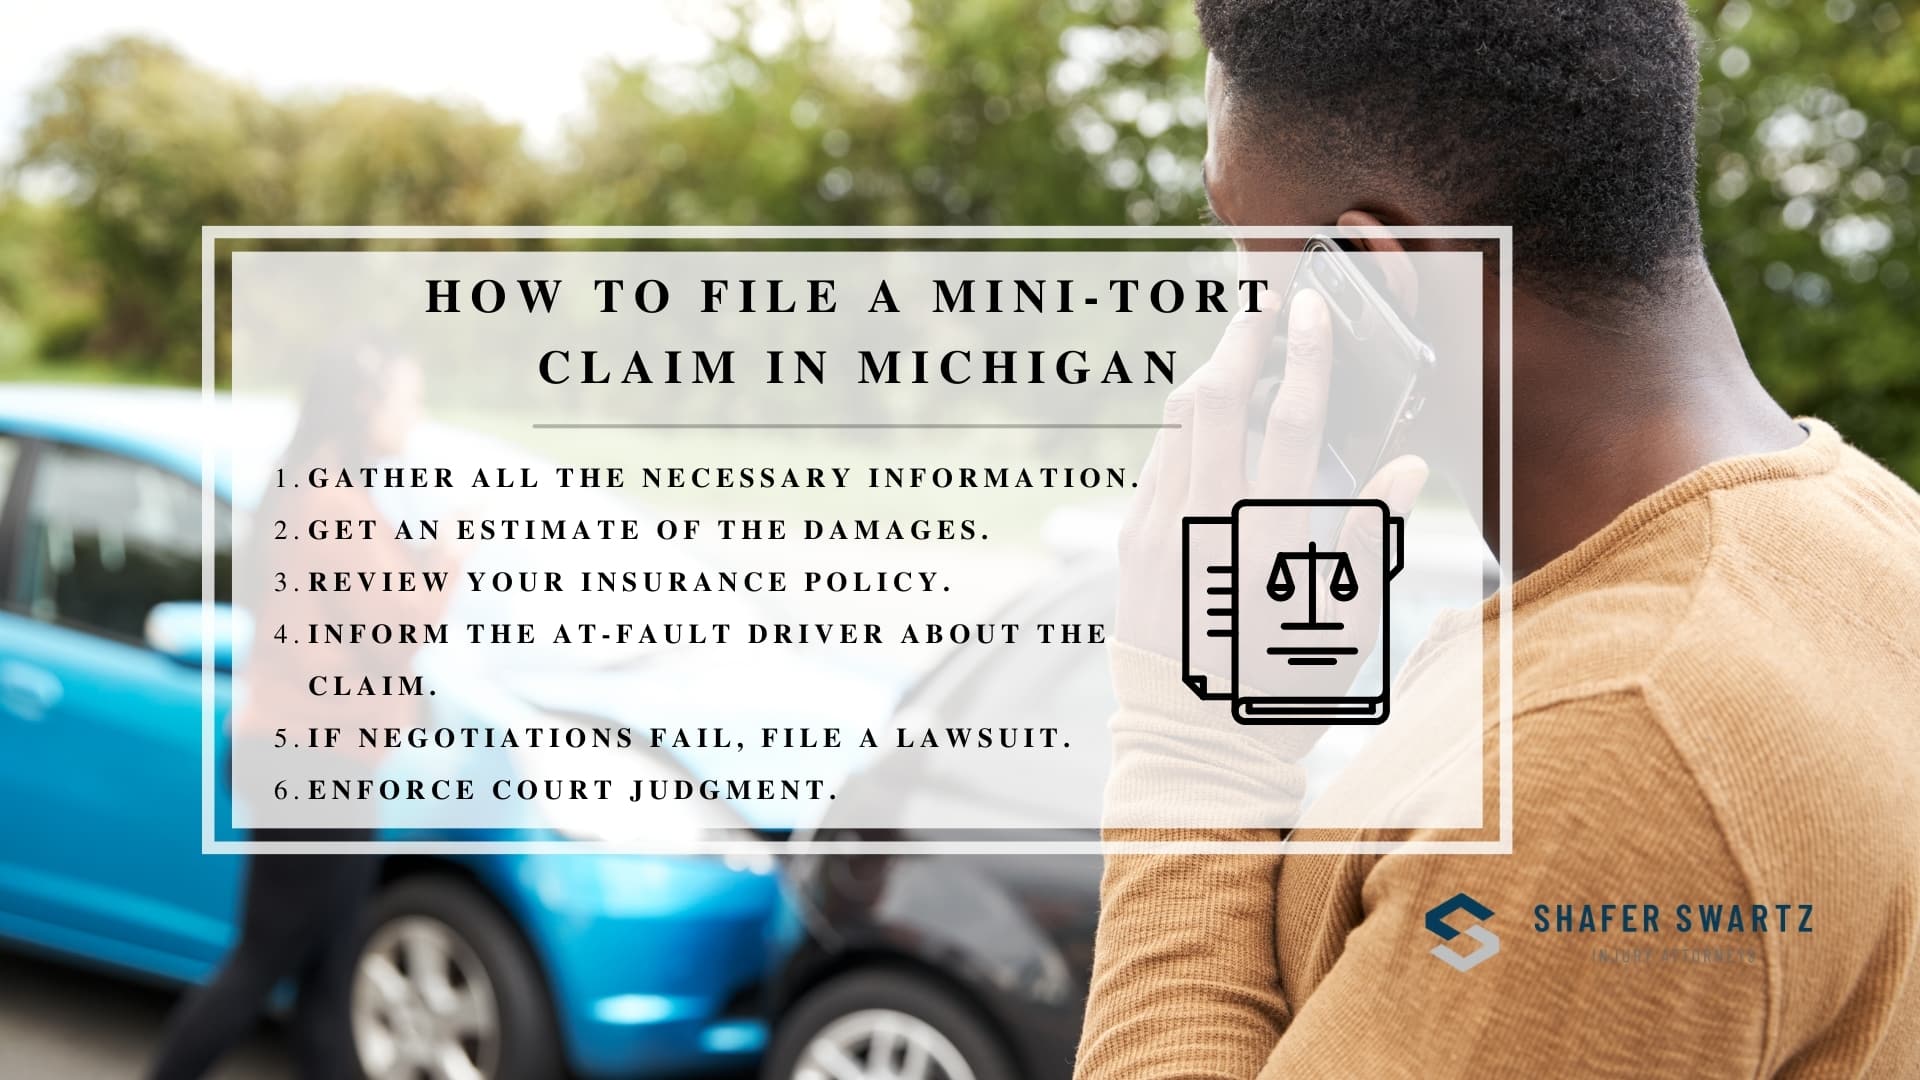 Infographic image of how to file a mini-tort claim in michigan